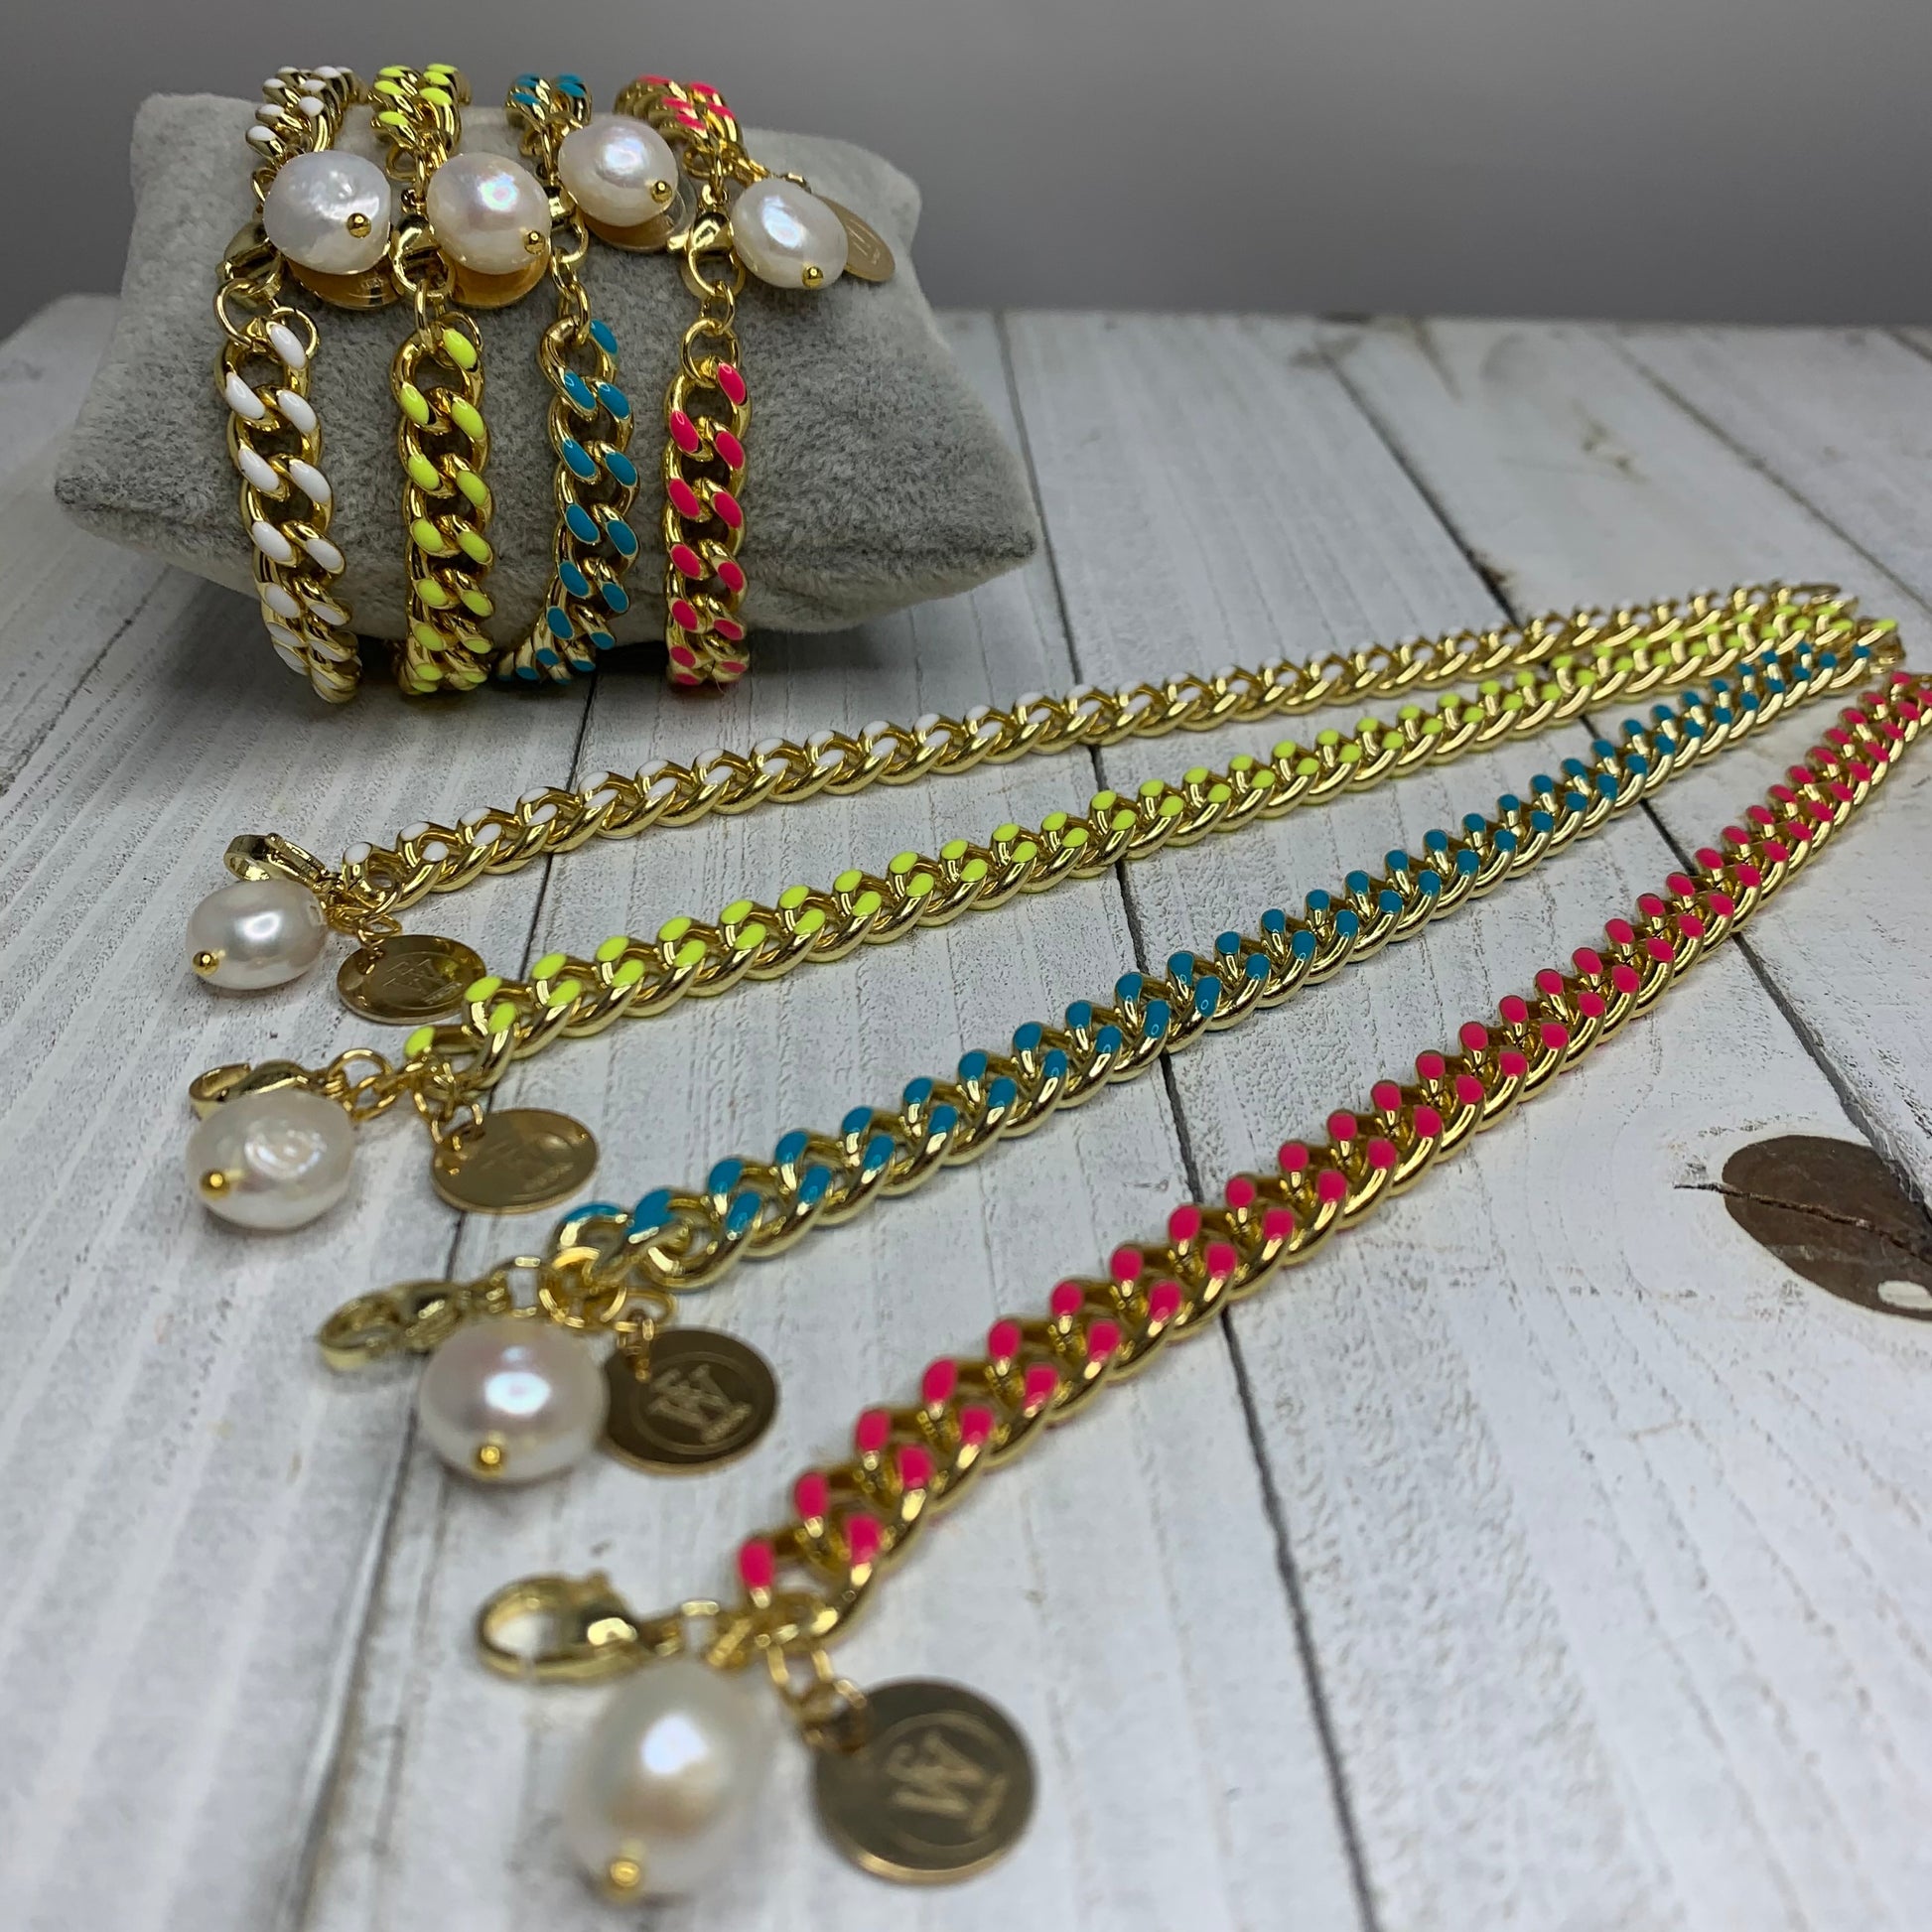 14k gold plated chain with neon enamel embellishments and fresh water pearl bracelet